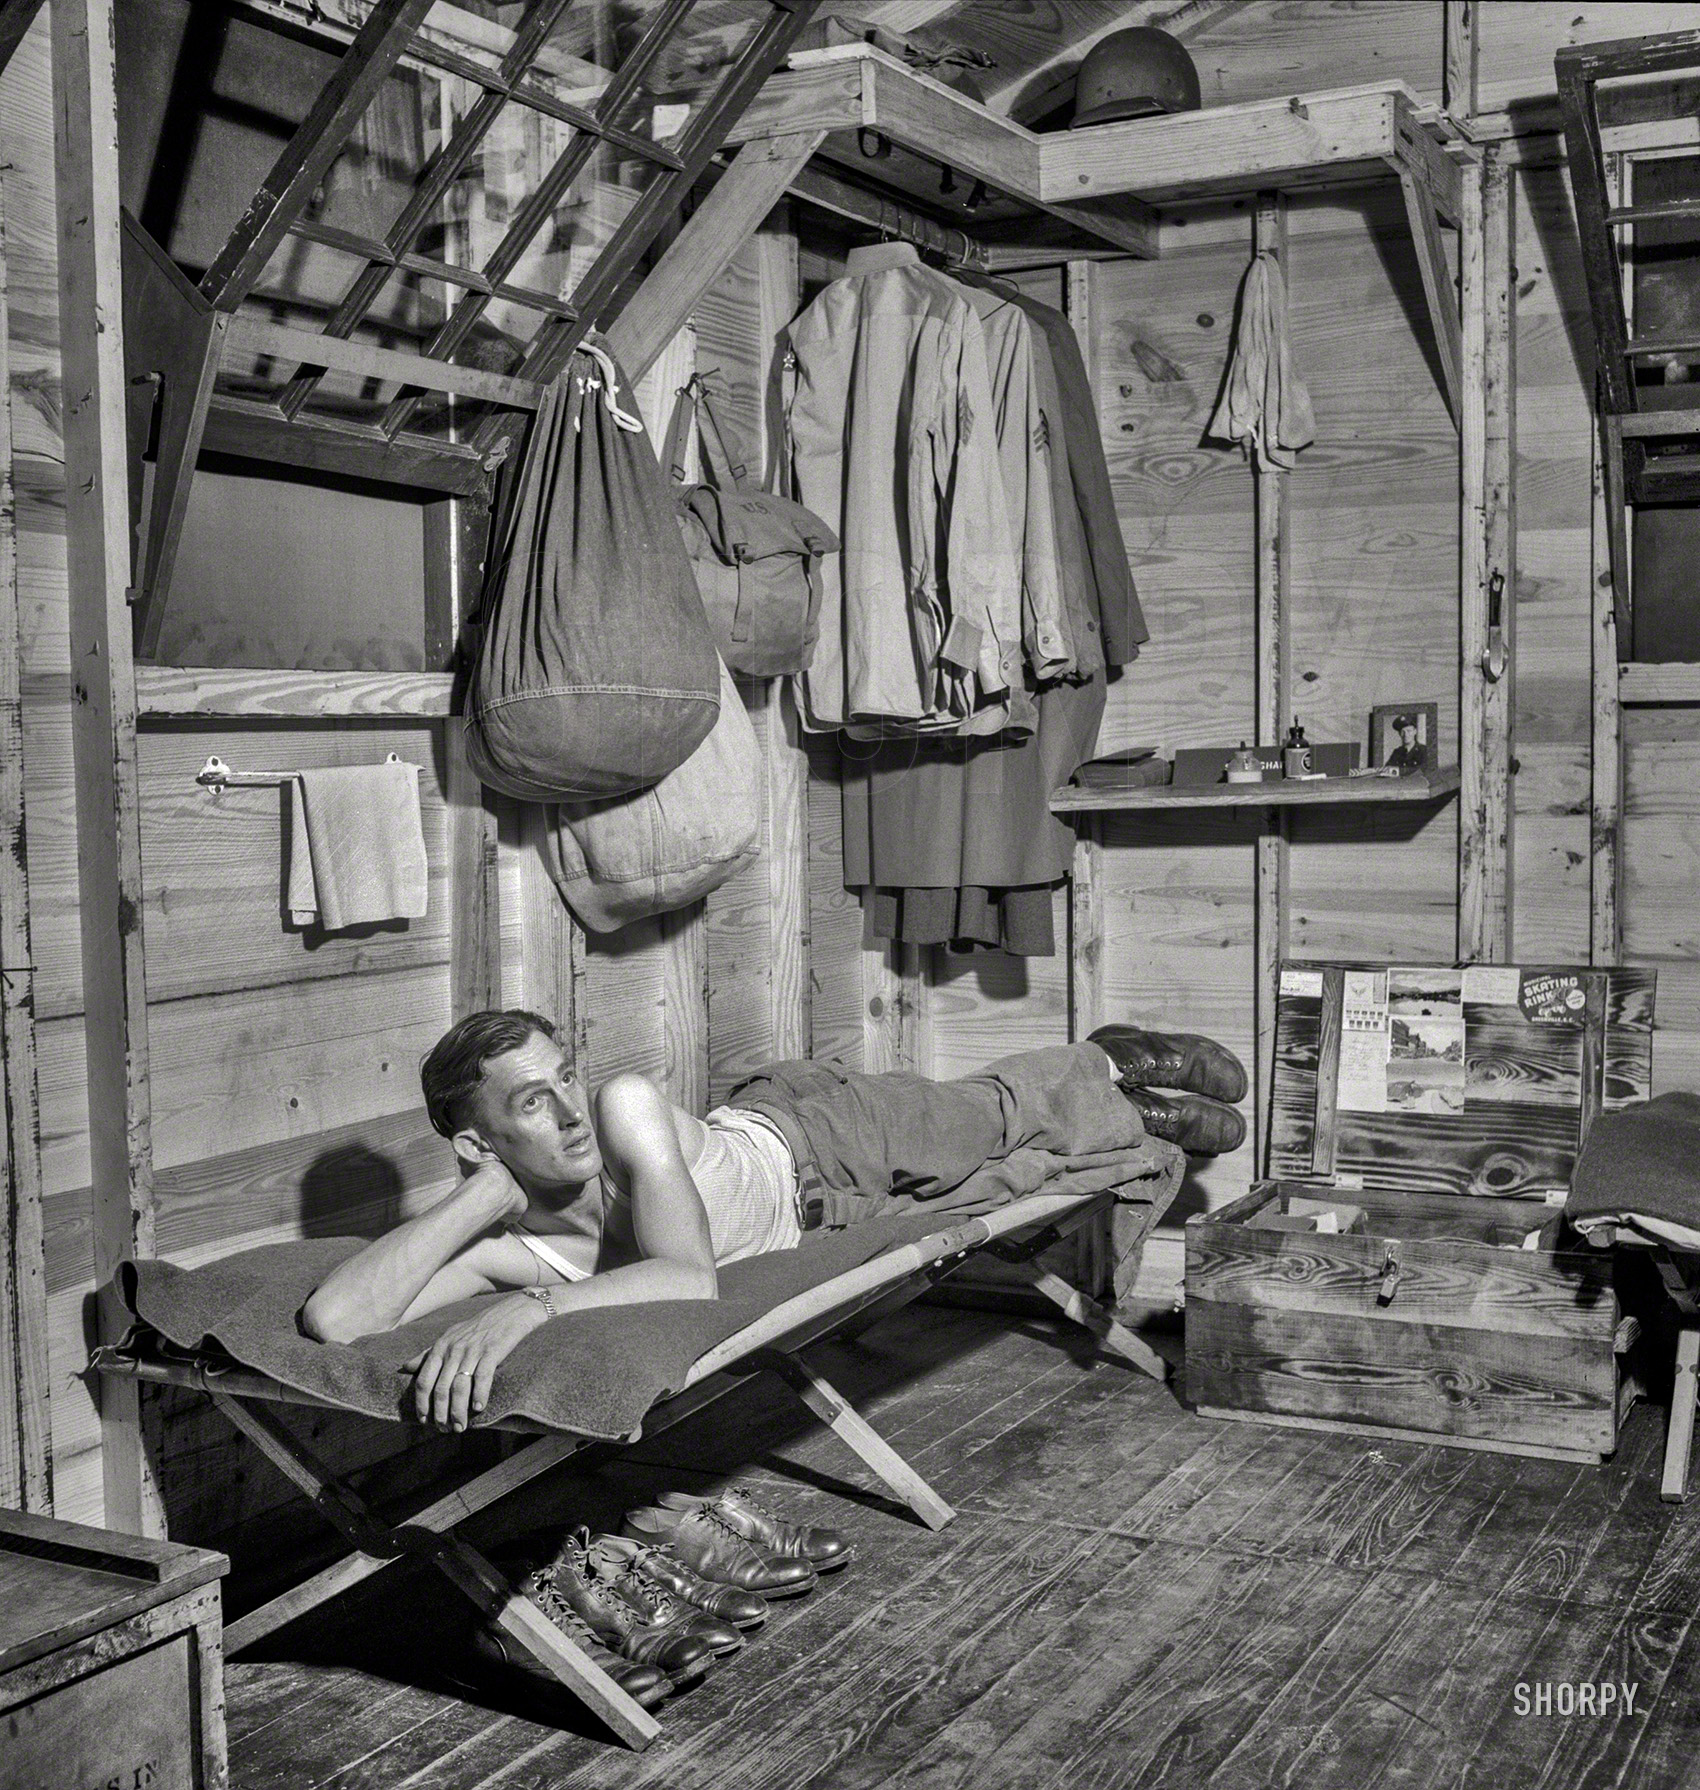 July 1943. Greenville, South Carolina. "Air Service Command. Enlisted man of the 25th Service Group relaxing in his hutment." Medium-format negative by Jack Delano for the Office of War Information. View full size.